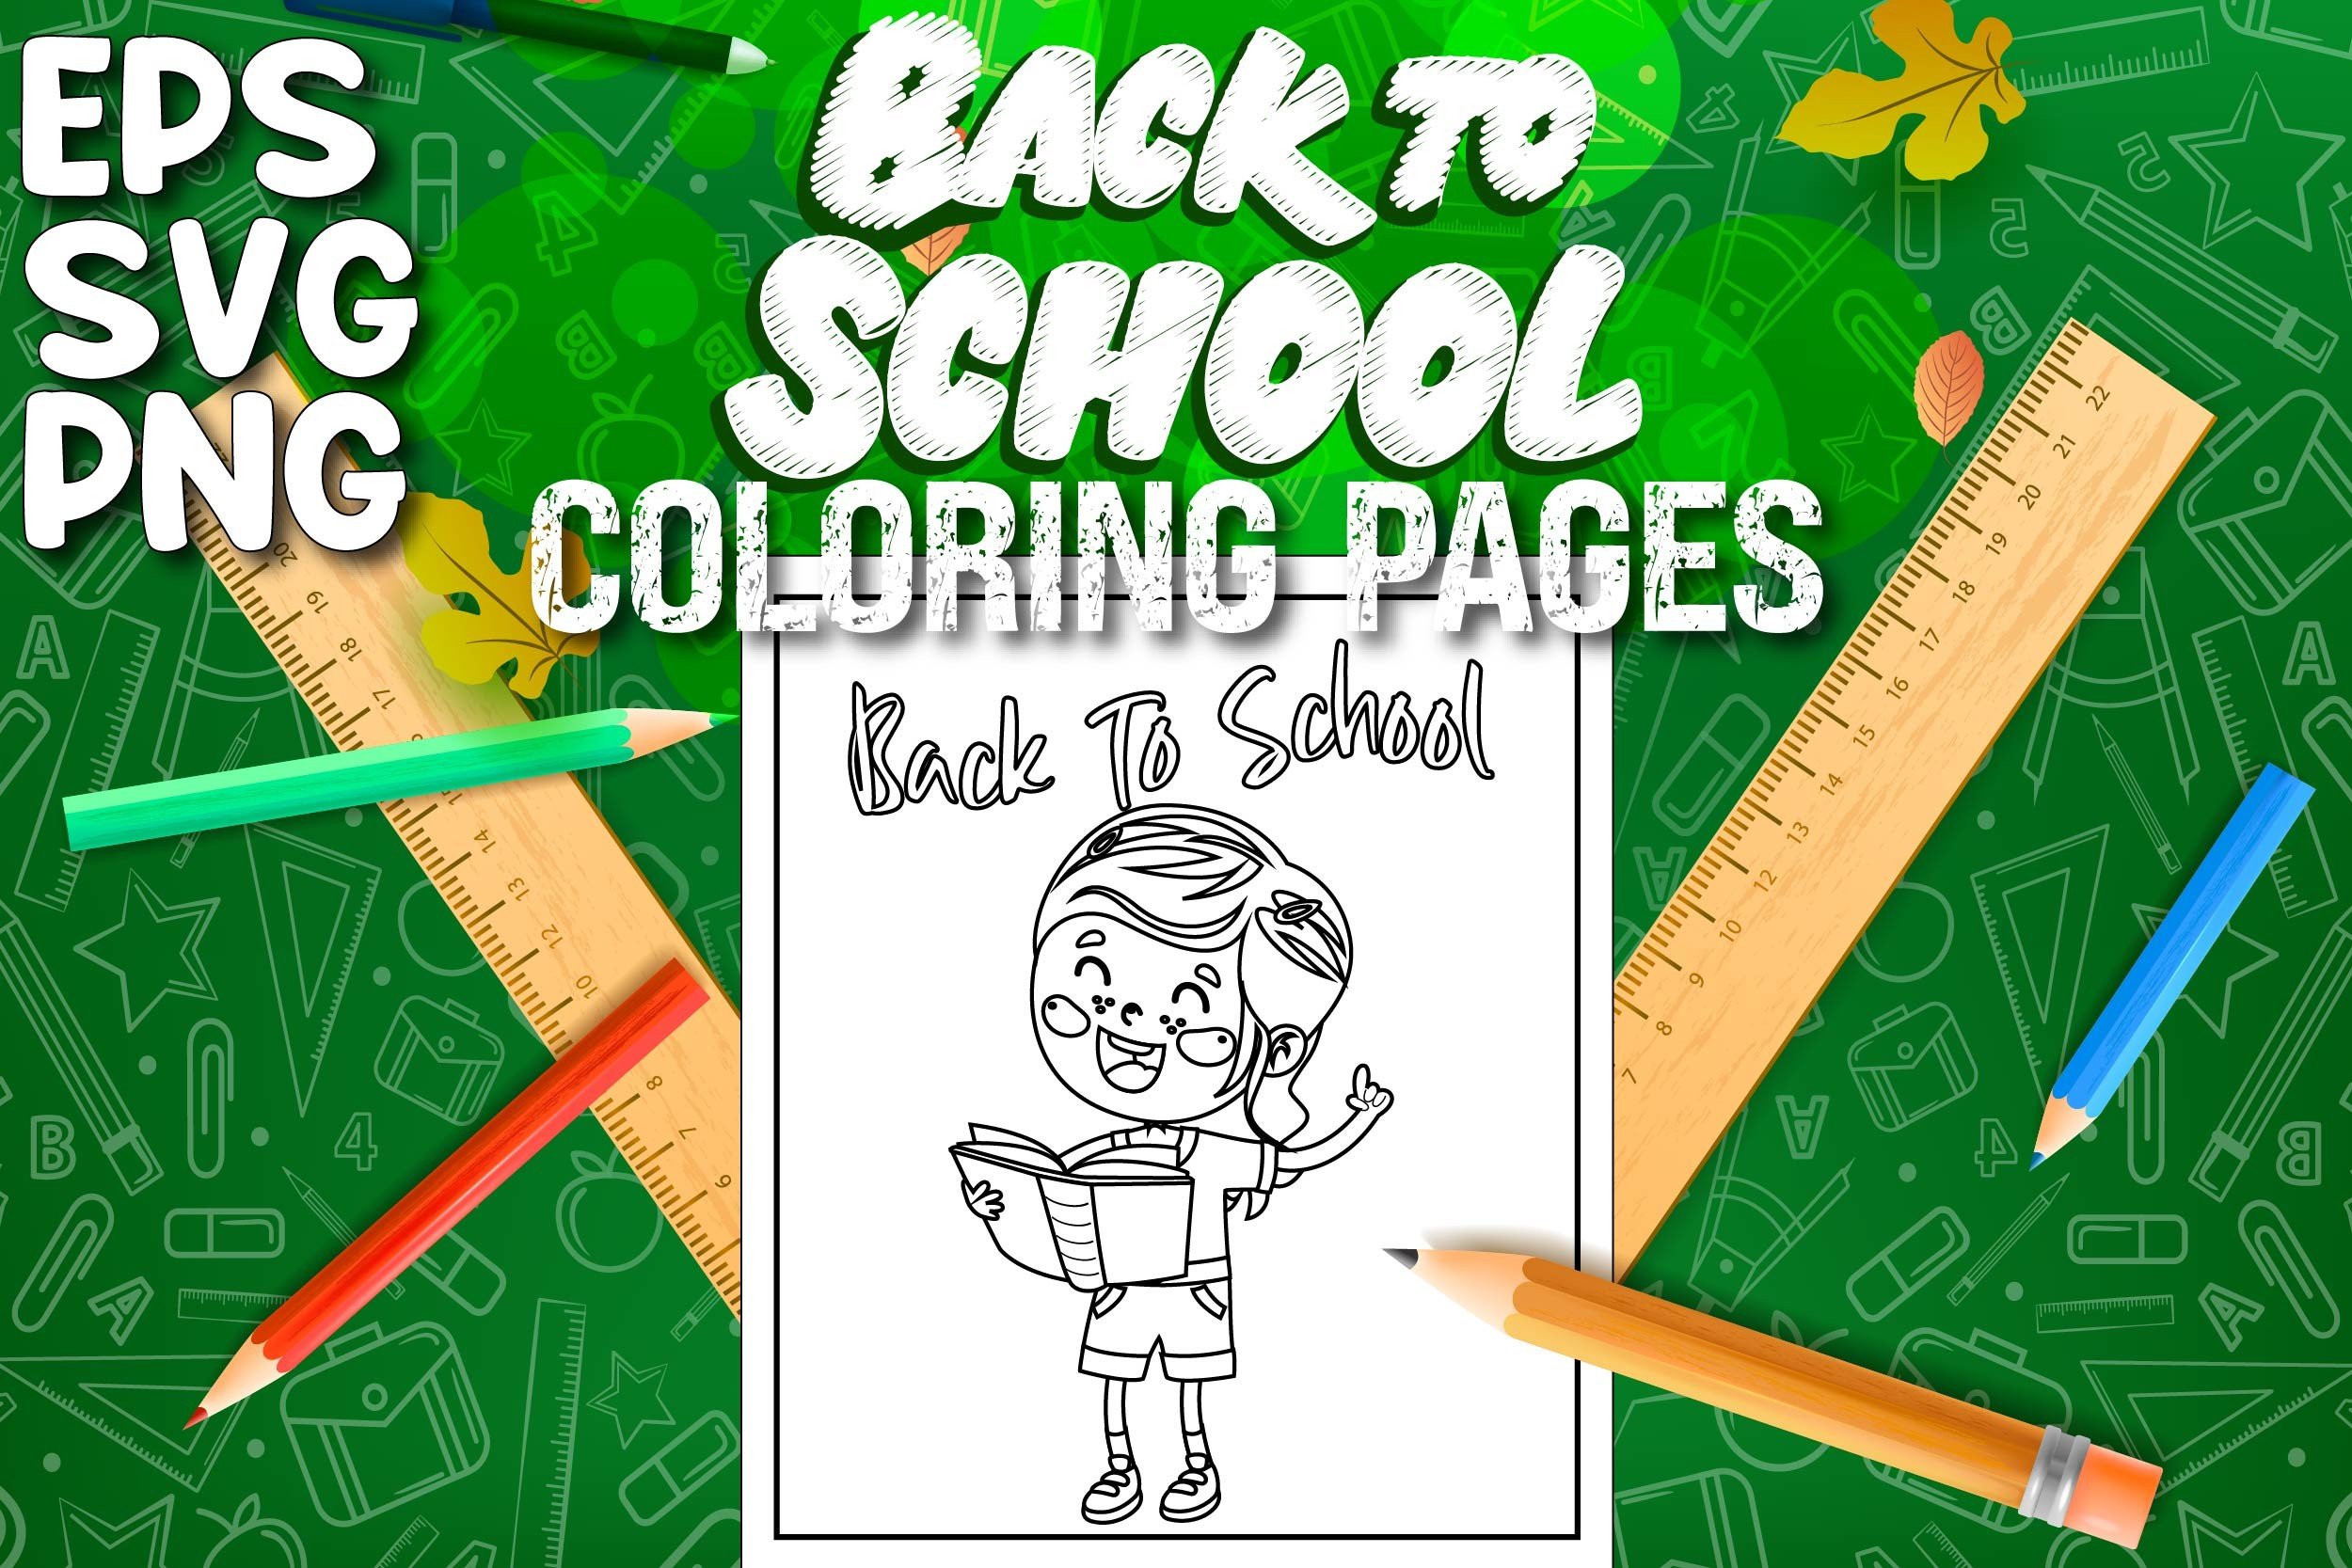 back-to-school-coloring-pages-vol-14-graphic-by-nandi-store-creative